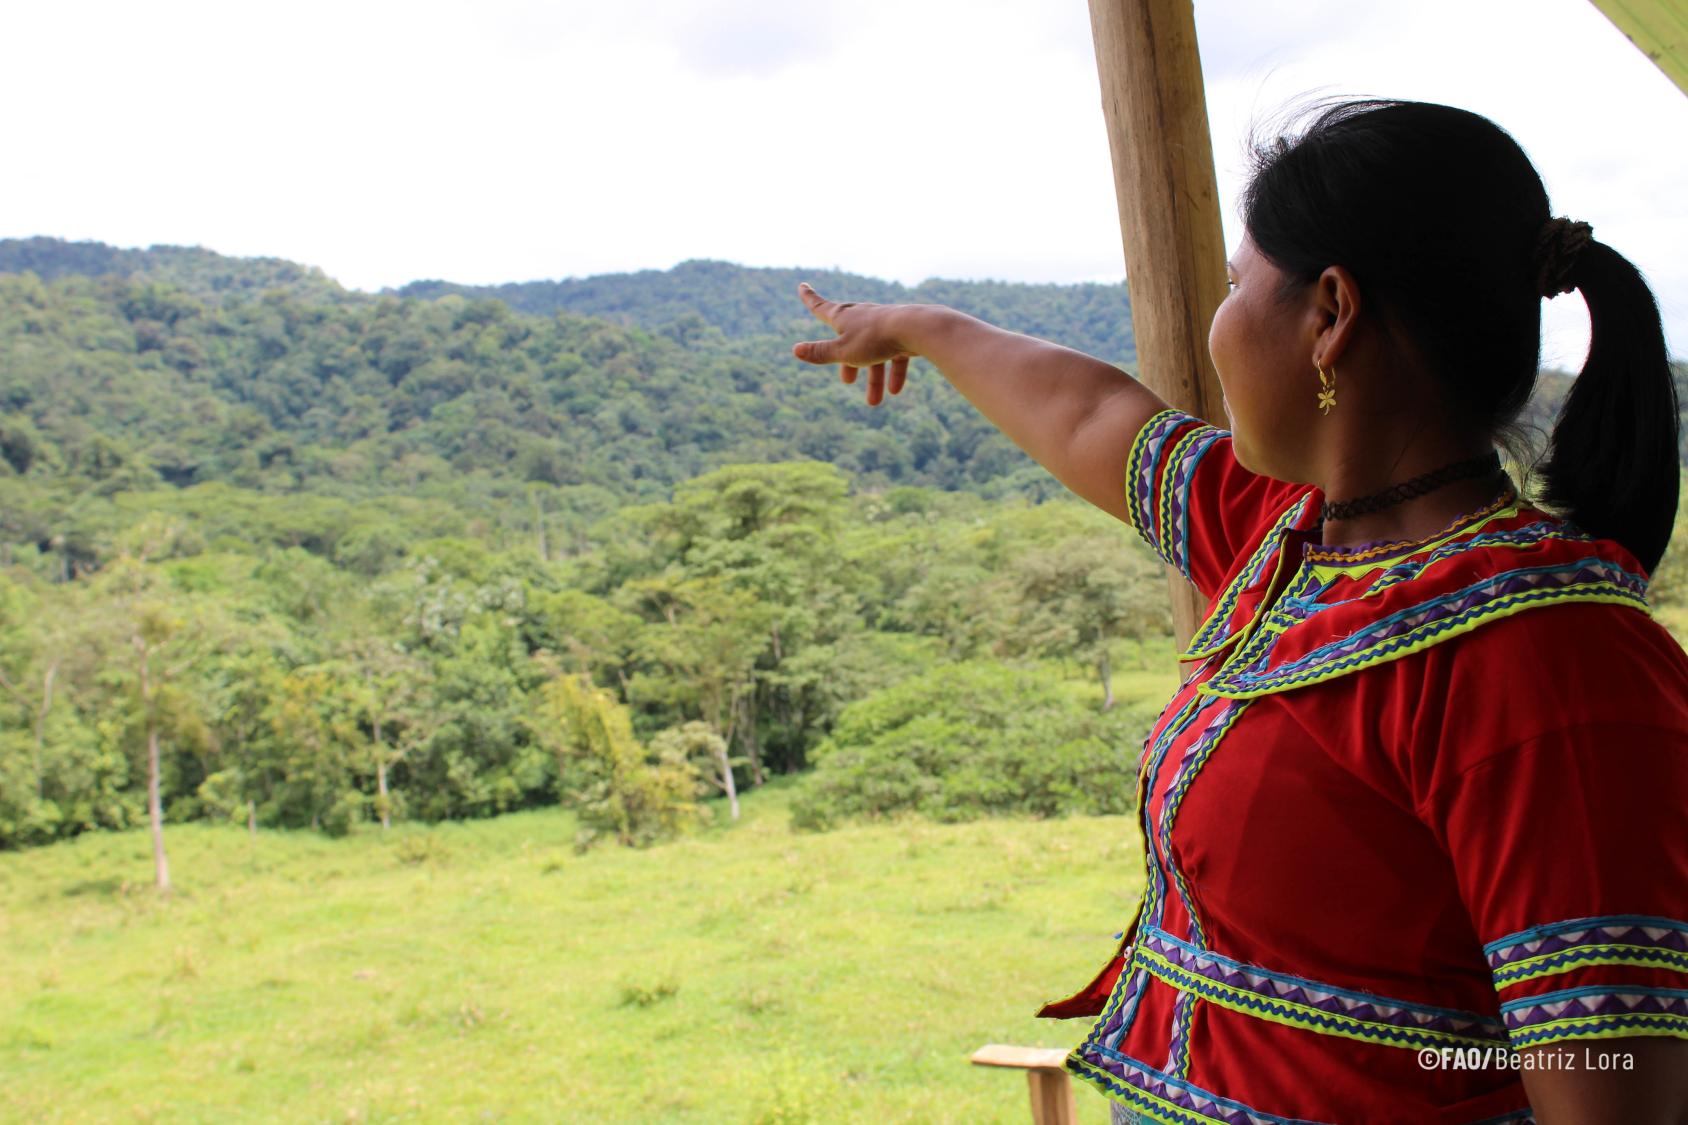 An indigenous woman in Guatemala in a colourful red dress points to the greenery in the distance